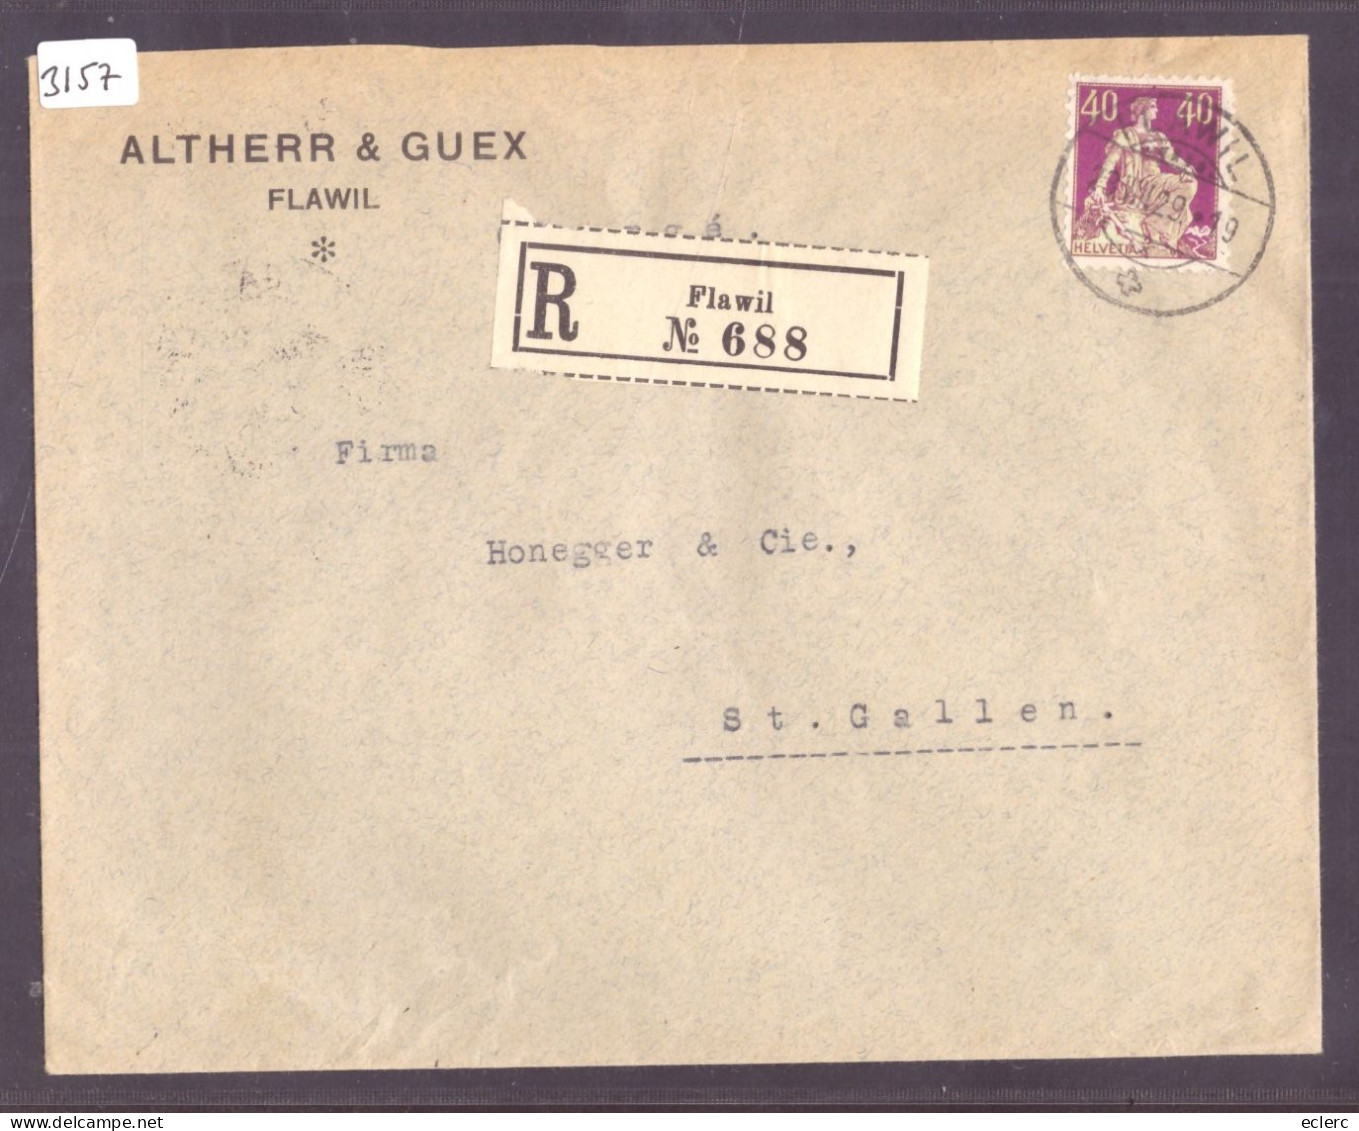 LETTRE A ENTÊTE RECOMMANDEE - ALTHERR & GUEX - - Covers & Documents